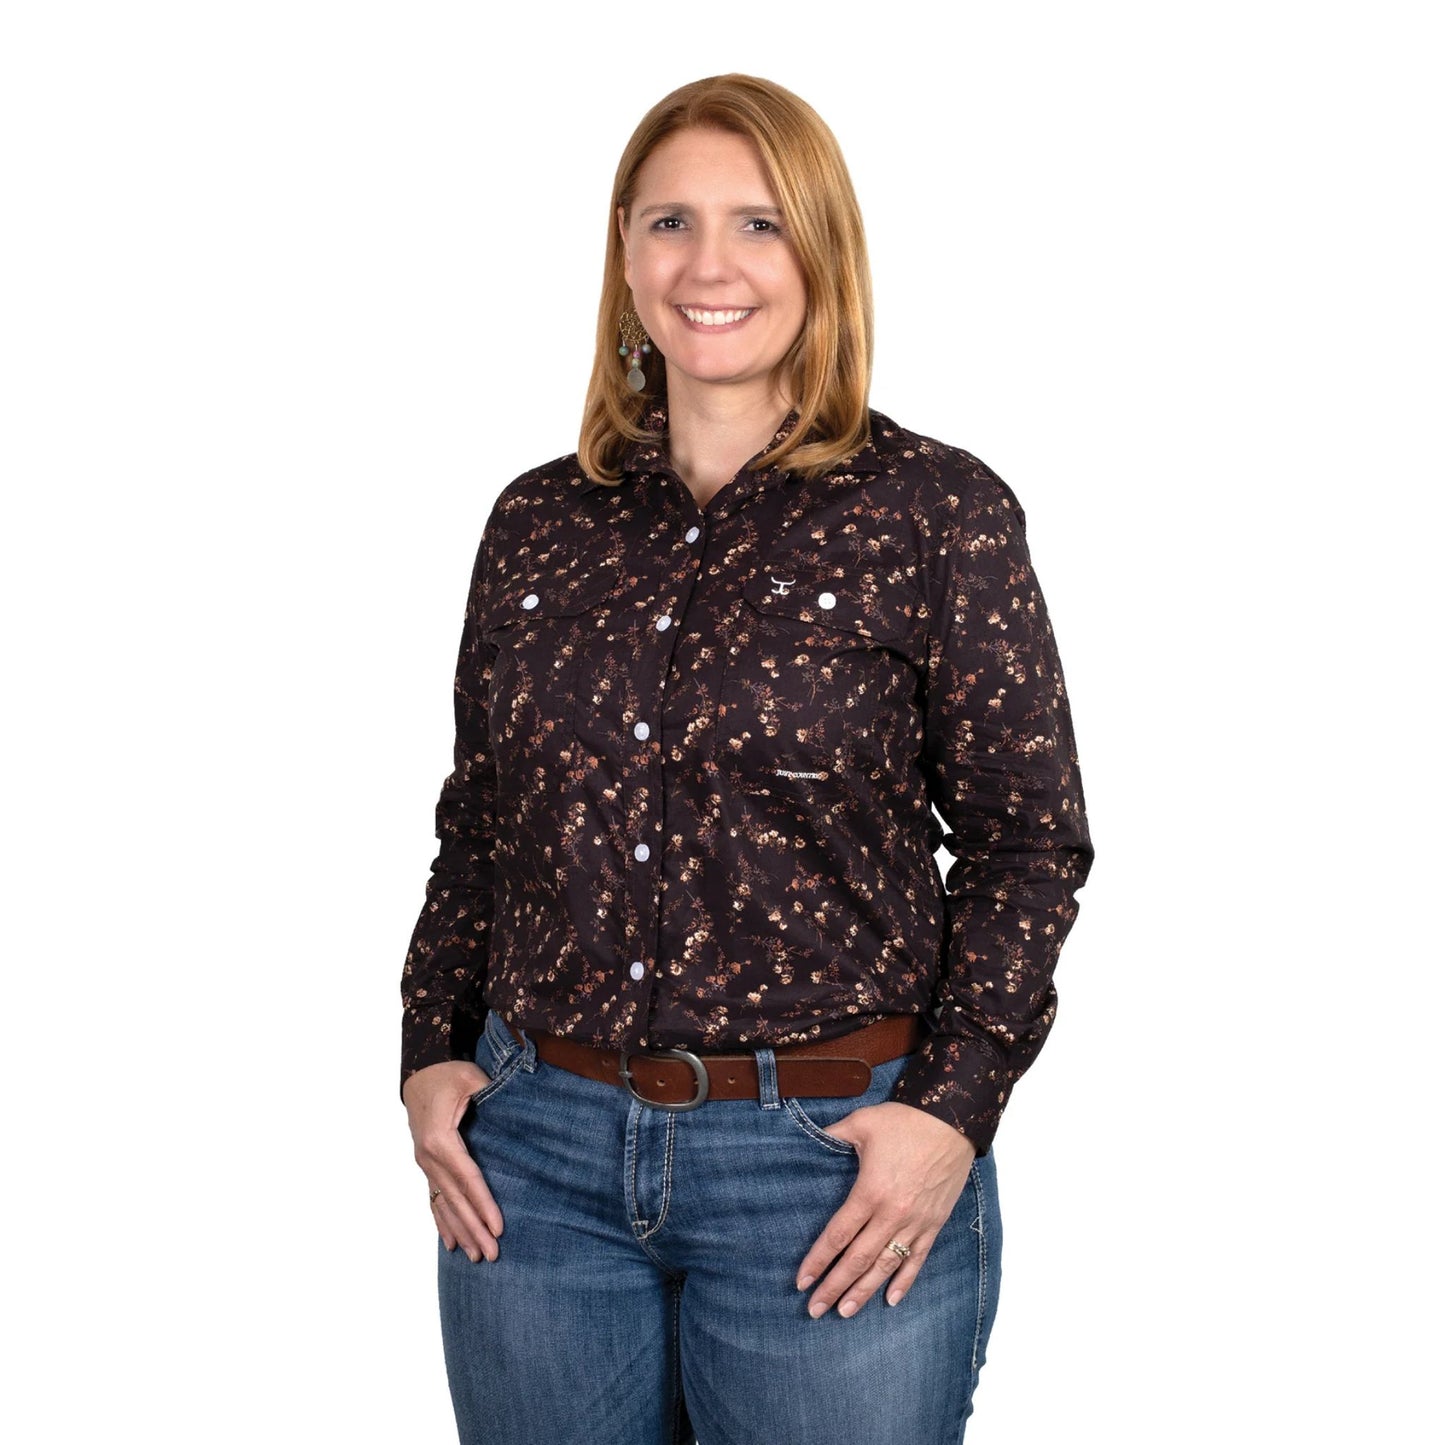 Just Country Womens Abbey Workshirt